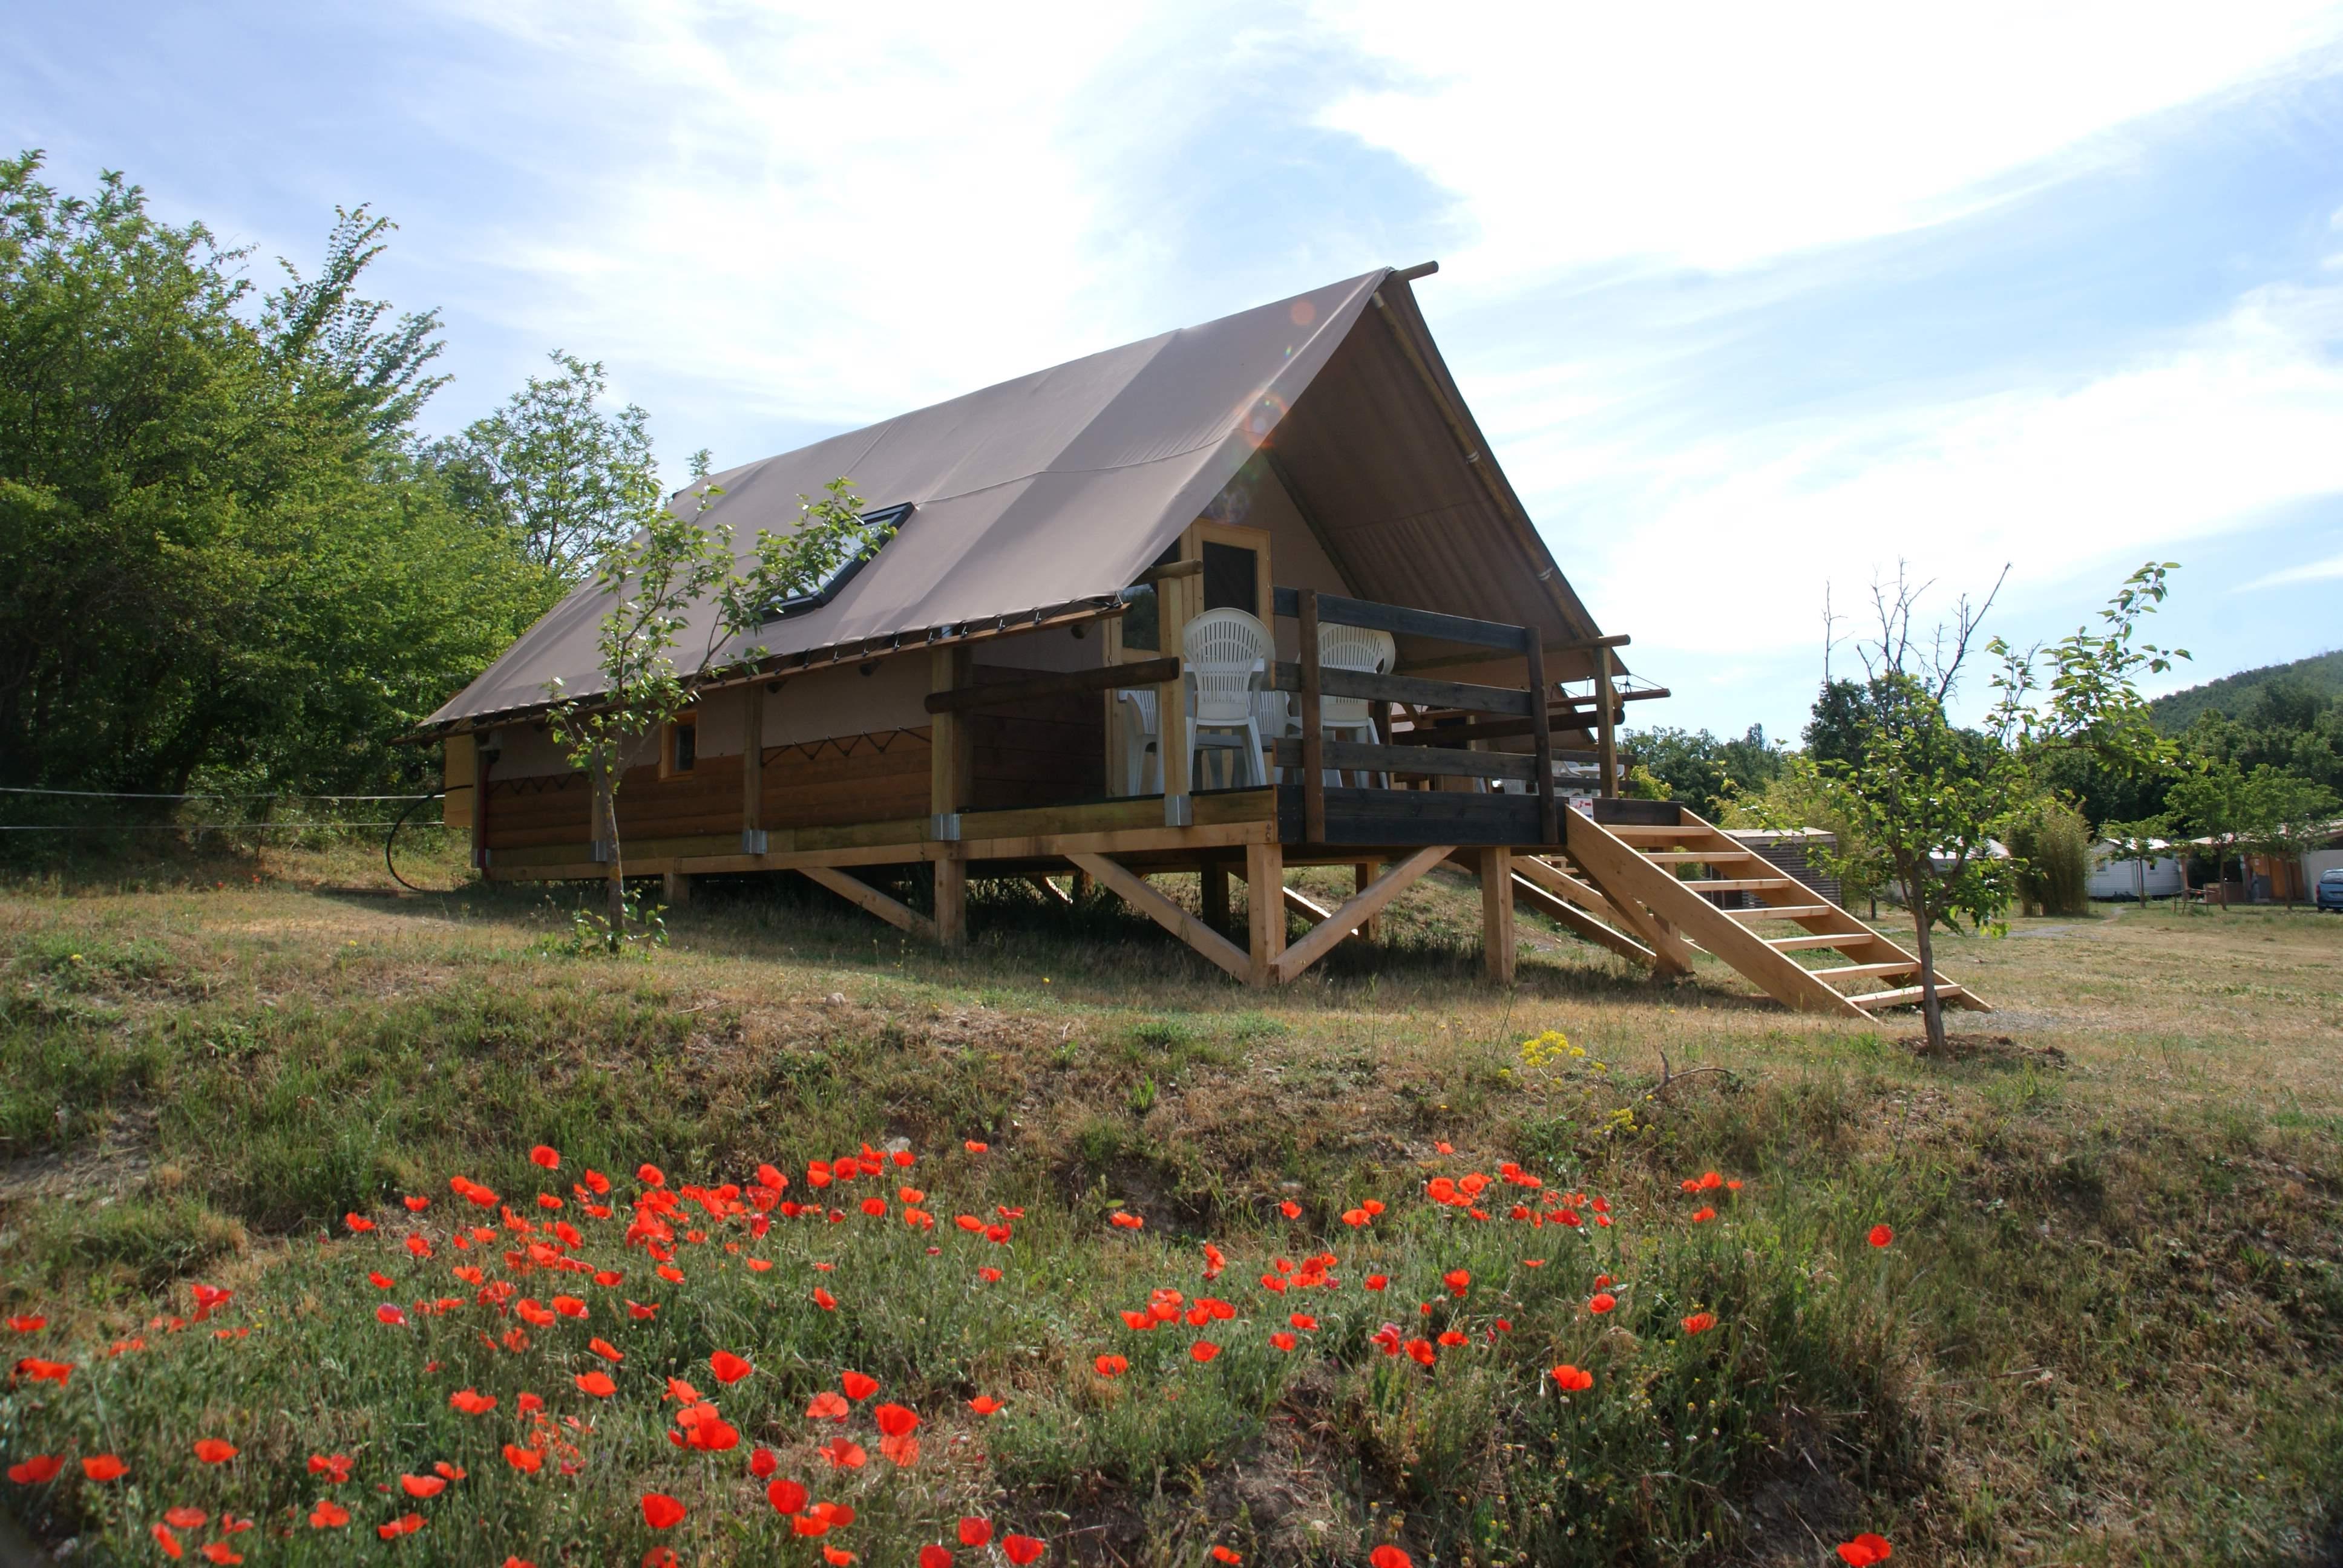 Accommodation - Wooden Cabin Trappeur 24M² Confort 2 Bedrooms + Air-Conditionning - Flower Camping La Beaume